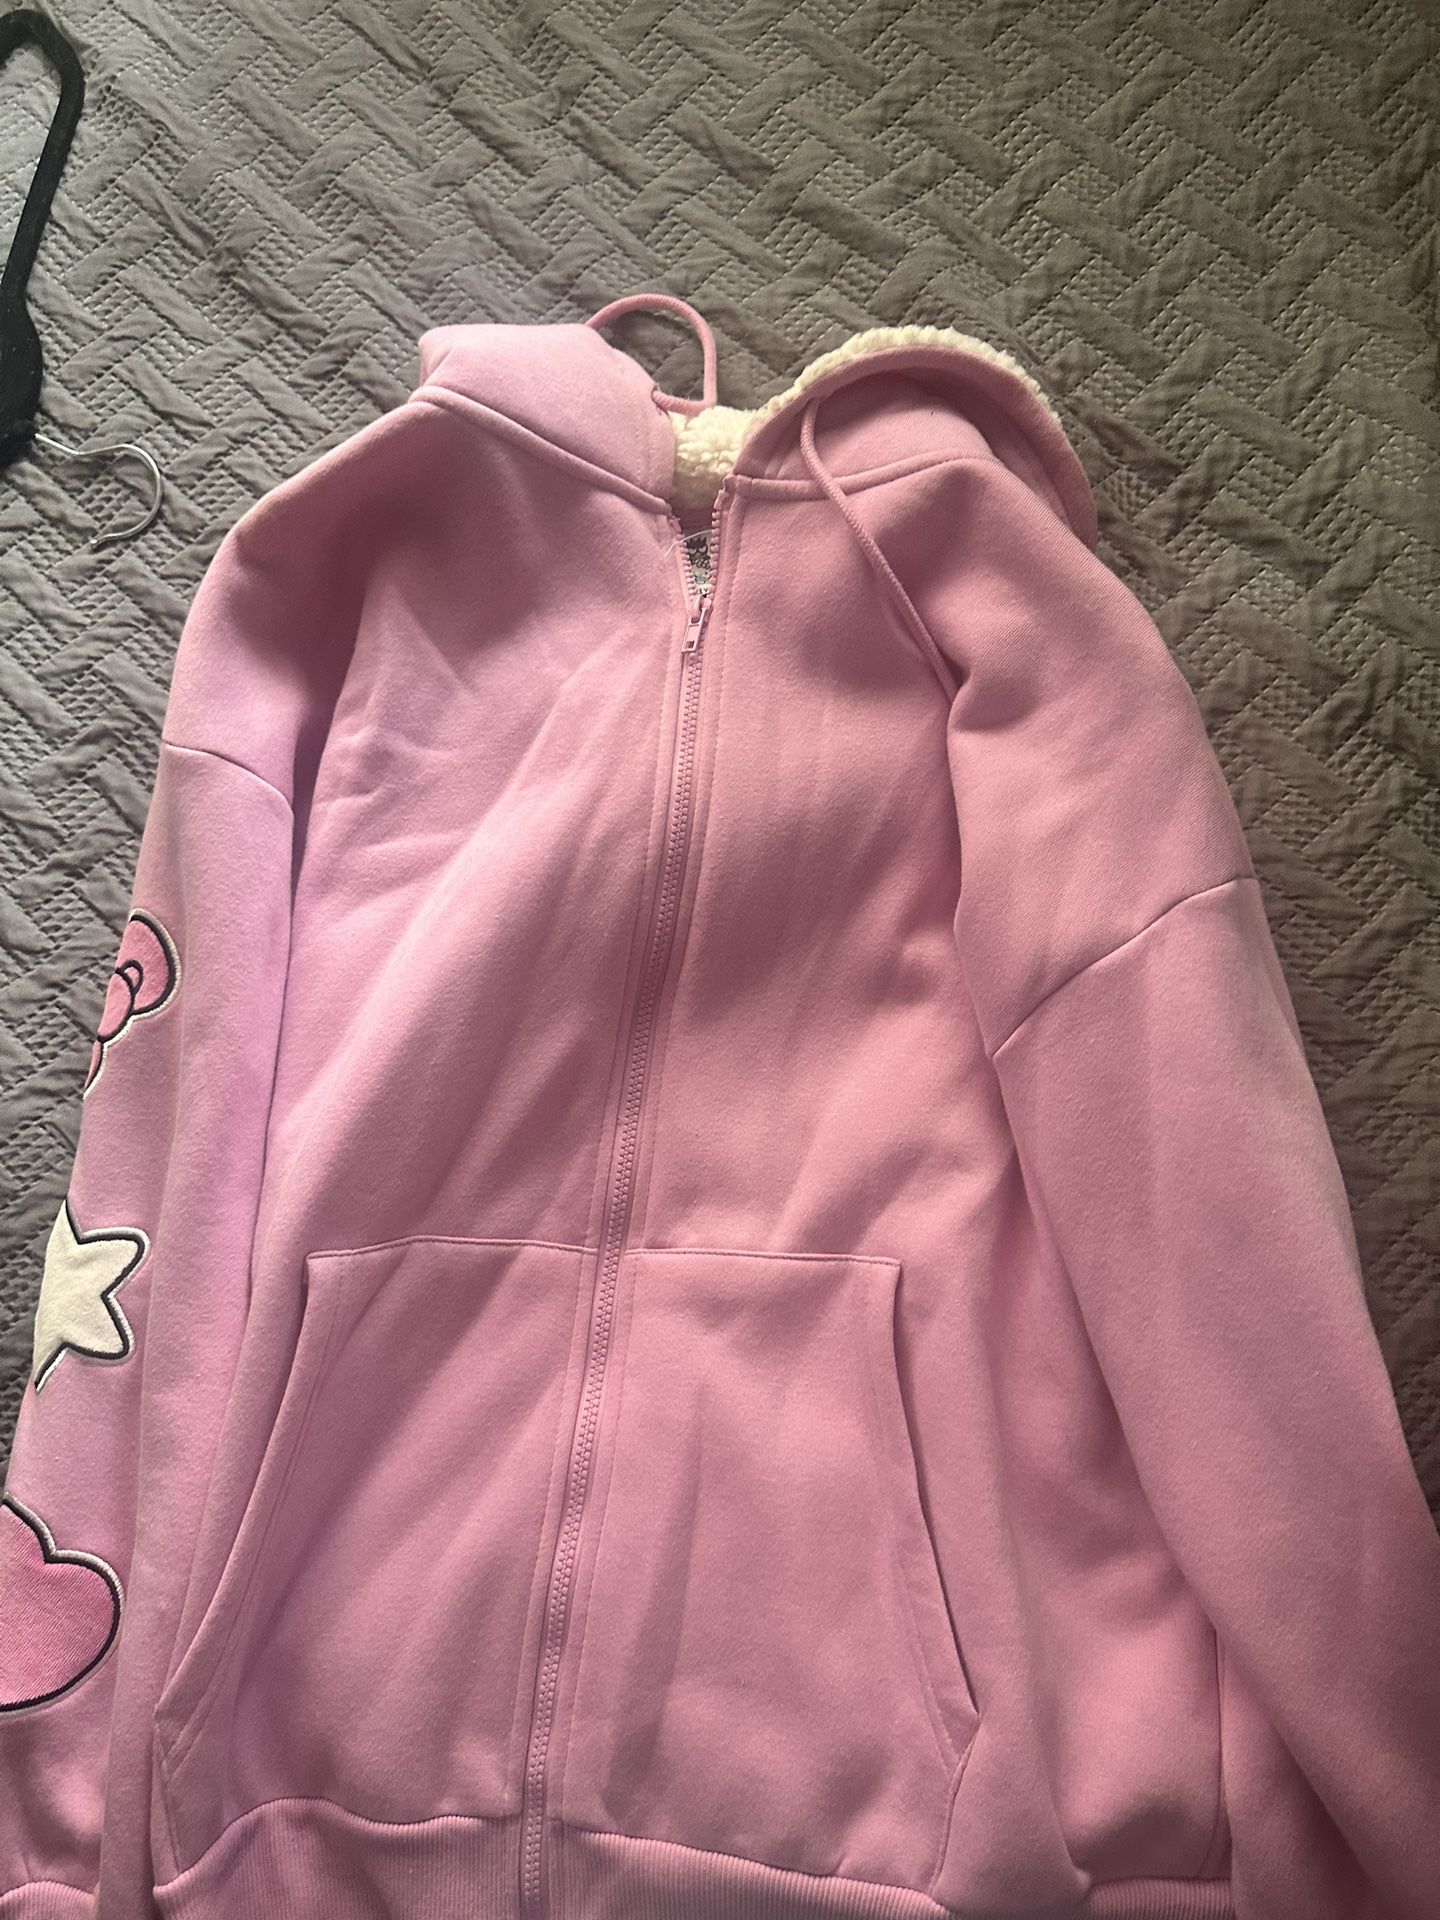 Forever 21 Hello Kitty Zip Up